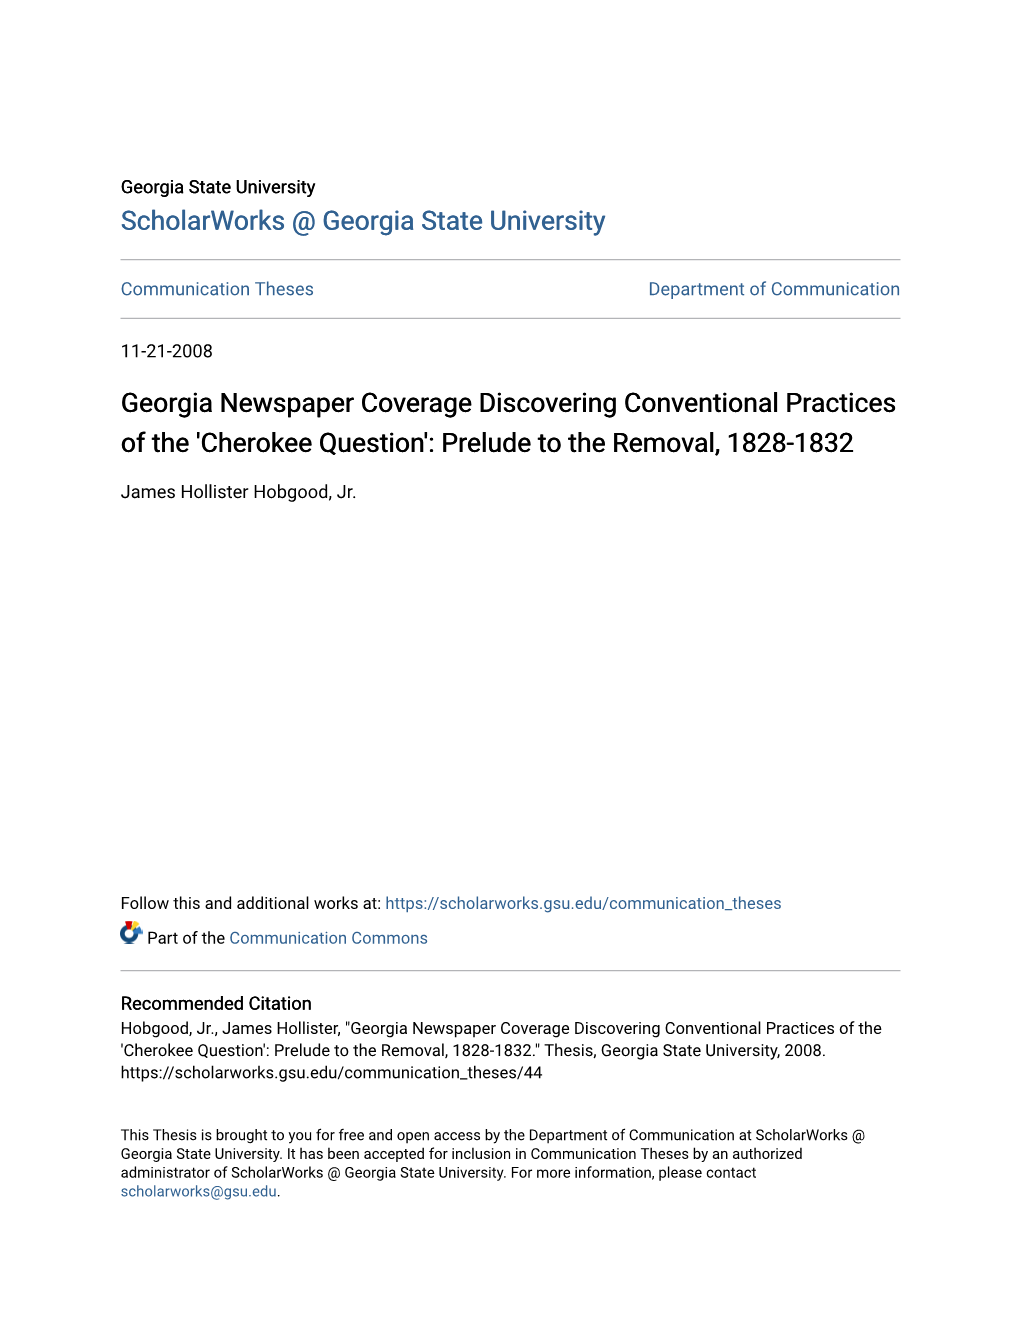 Georgia Newspaper Coverage Discovering Conventional Practices of the 'Cherokee Question': Prelude to the Removal, 1828-1832